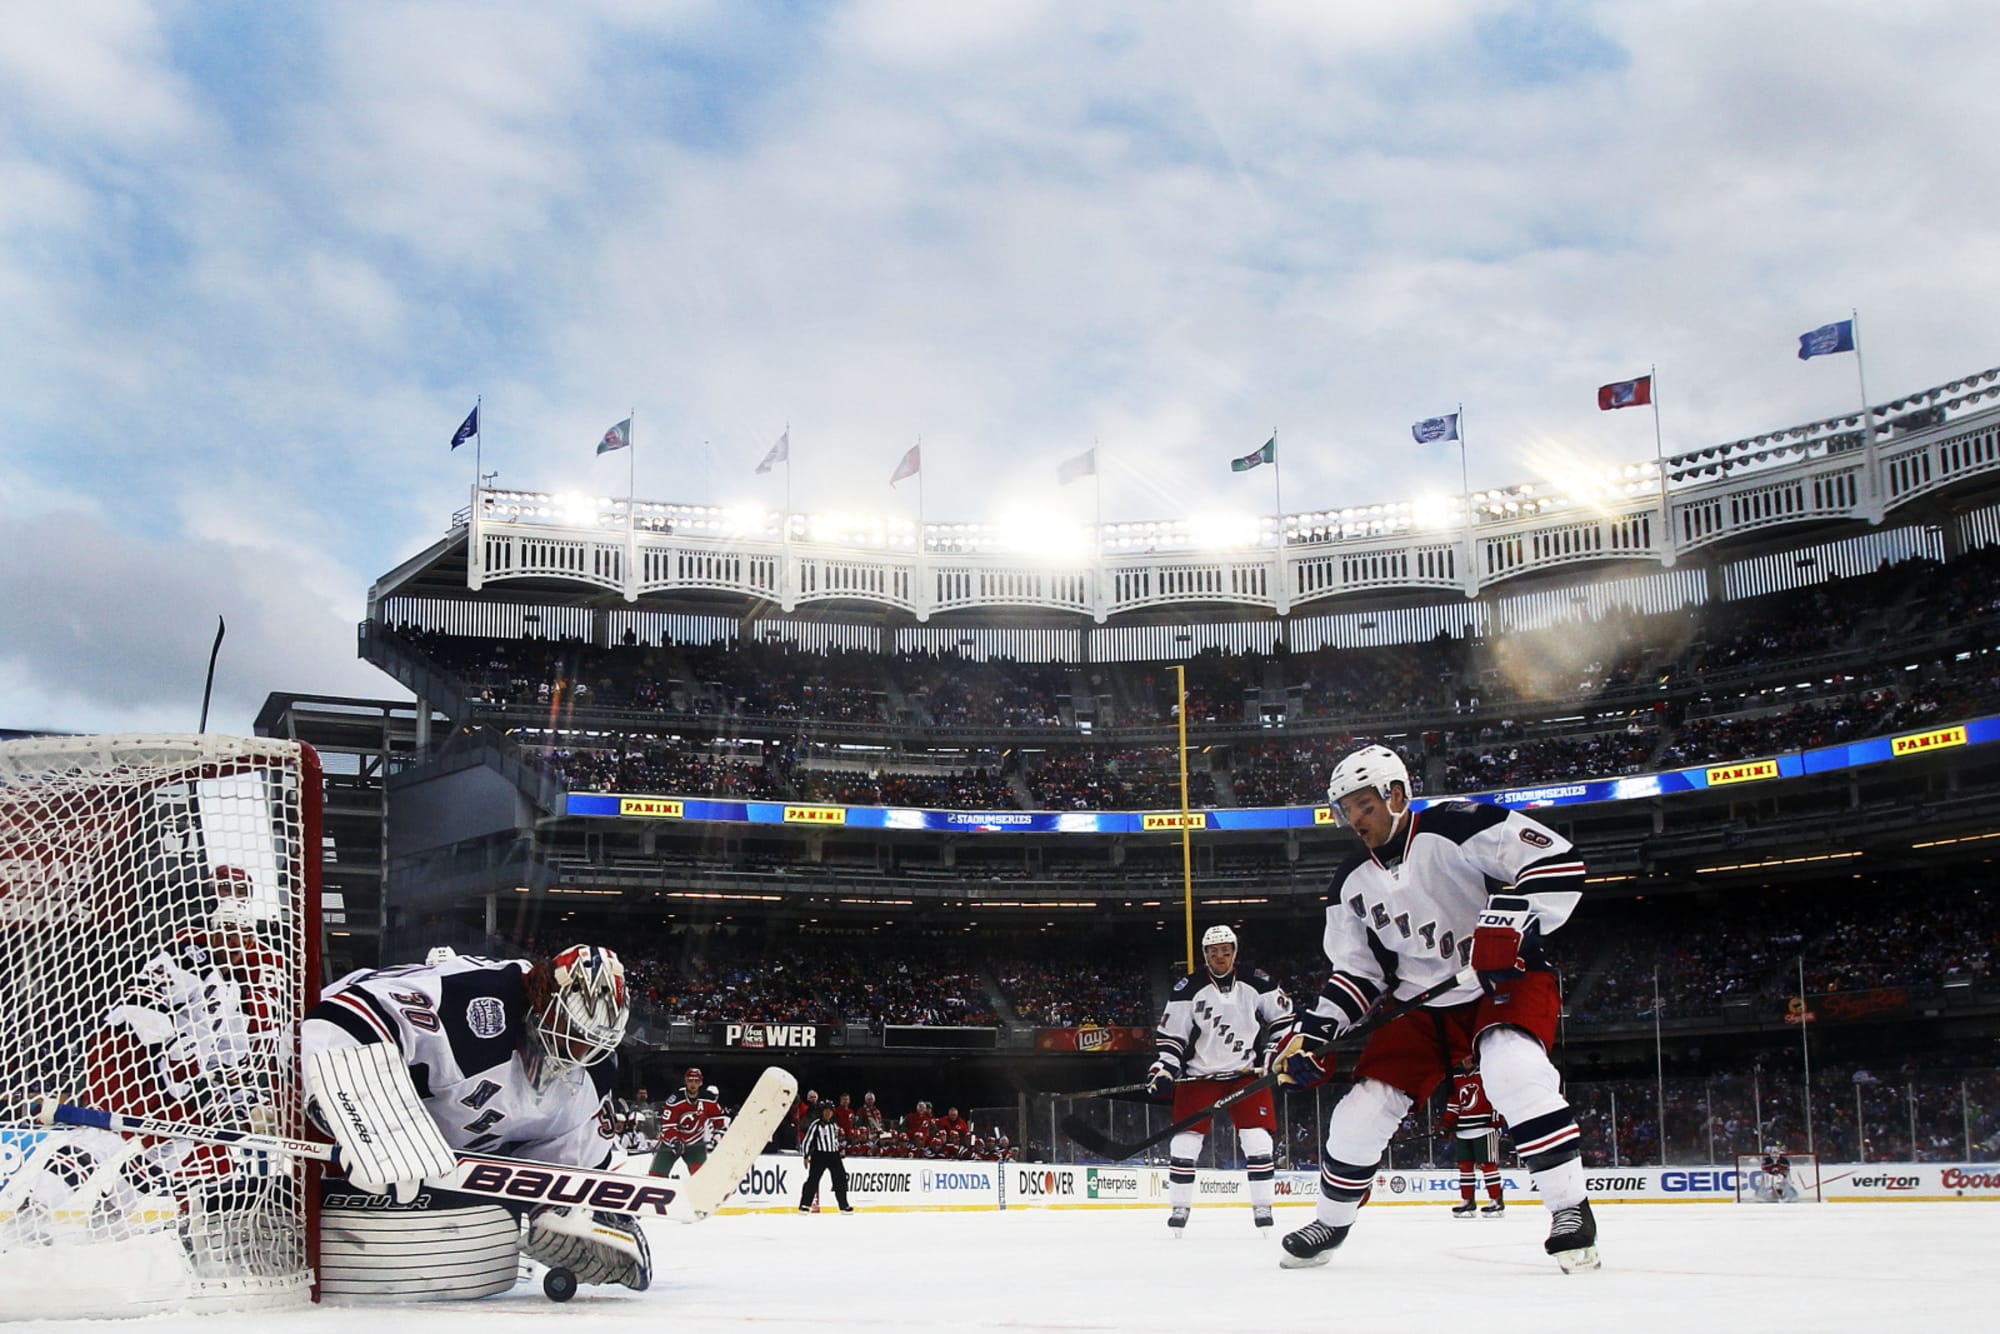 Winter Classic Alumni Game 2014: Schedule, Rosters and More